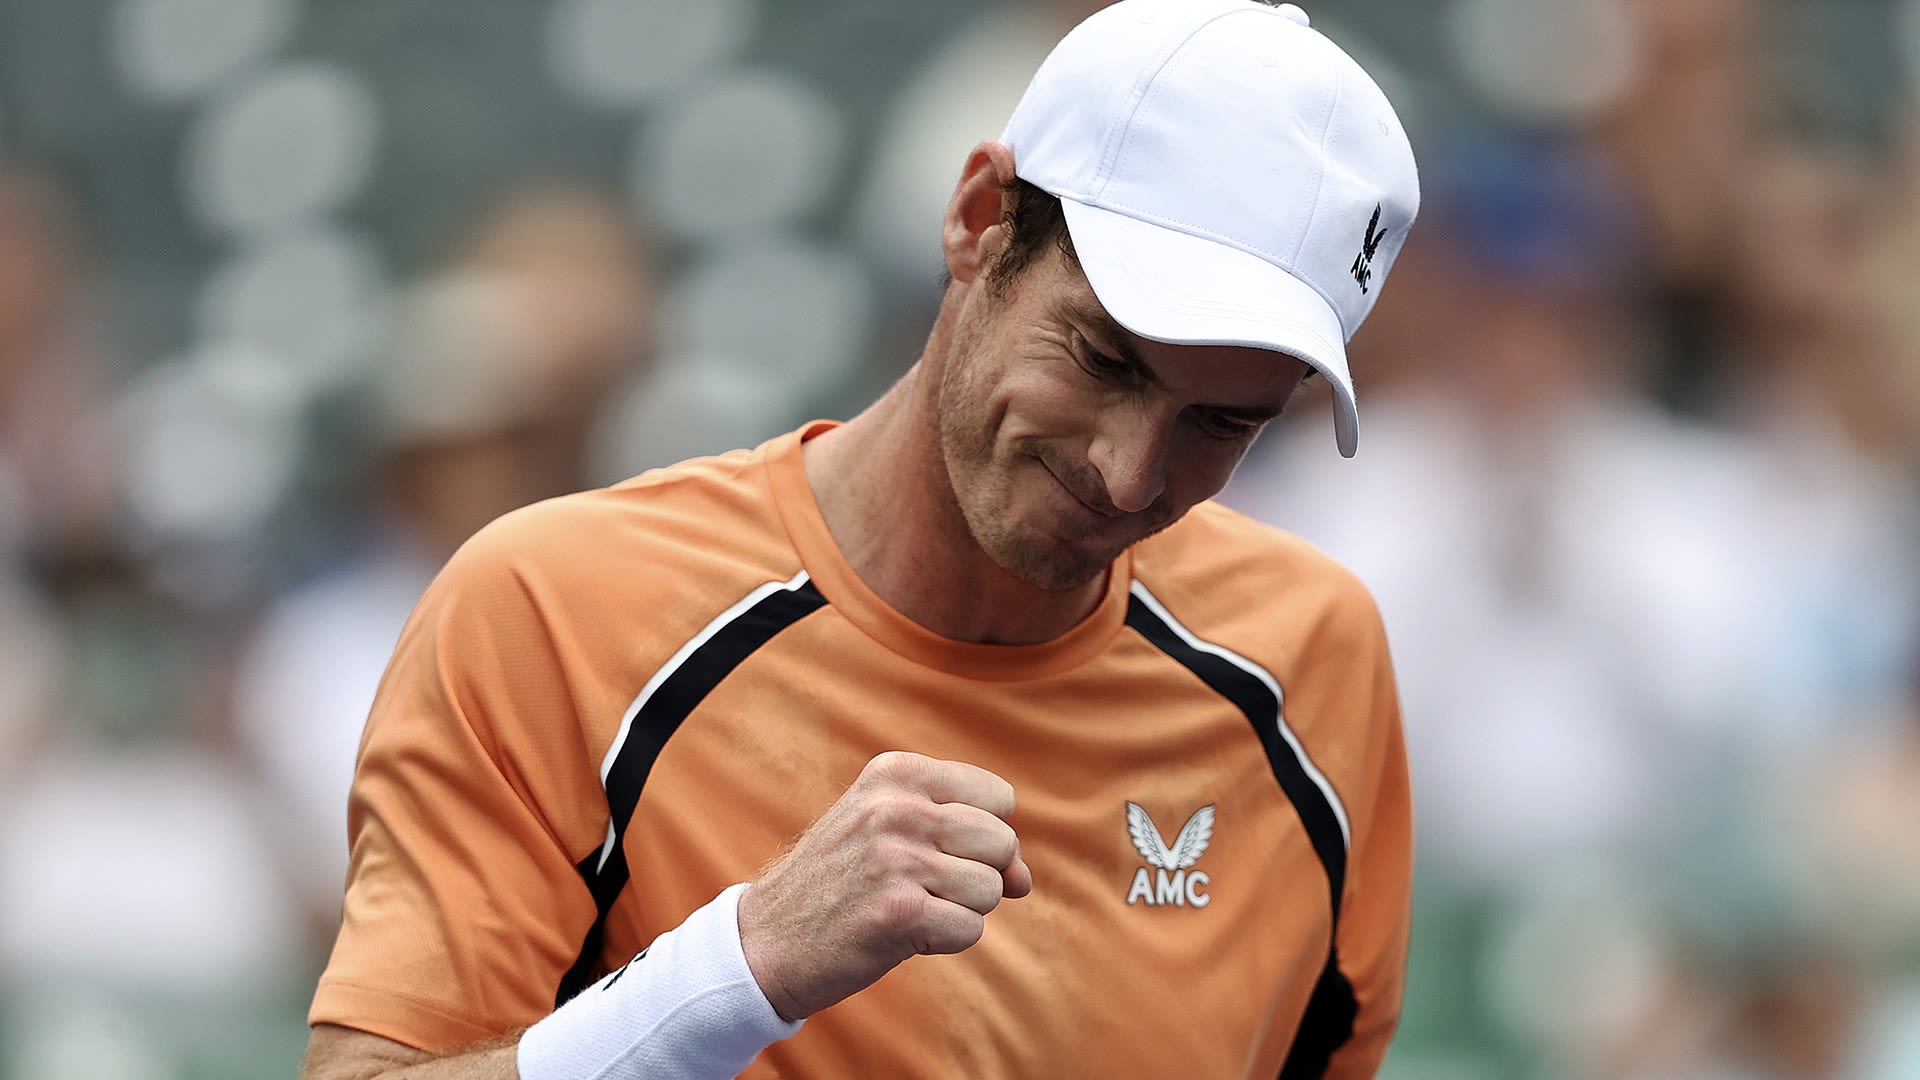 Andy Murray to return from ankle injury at Geneva this month, hinting at Roland Garros comeback | Tennis.com